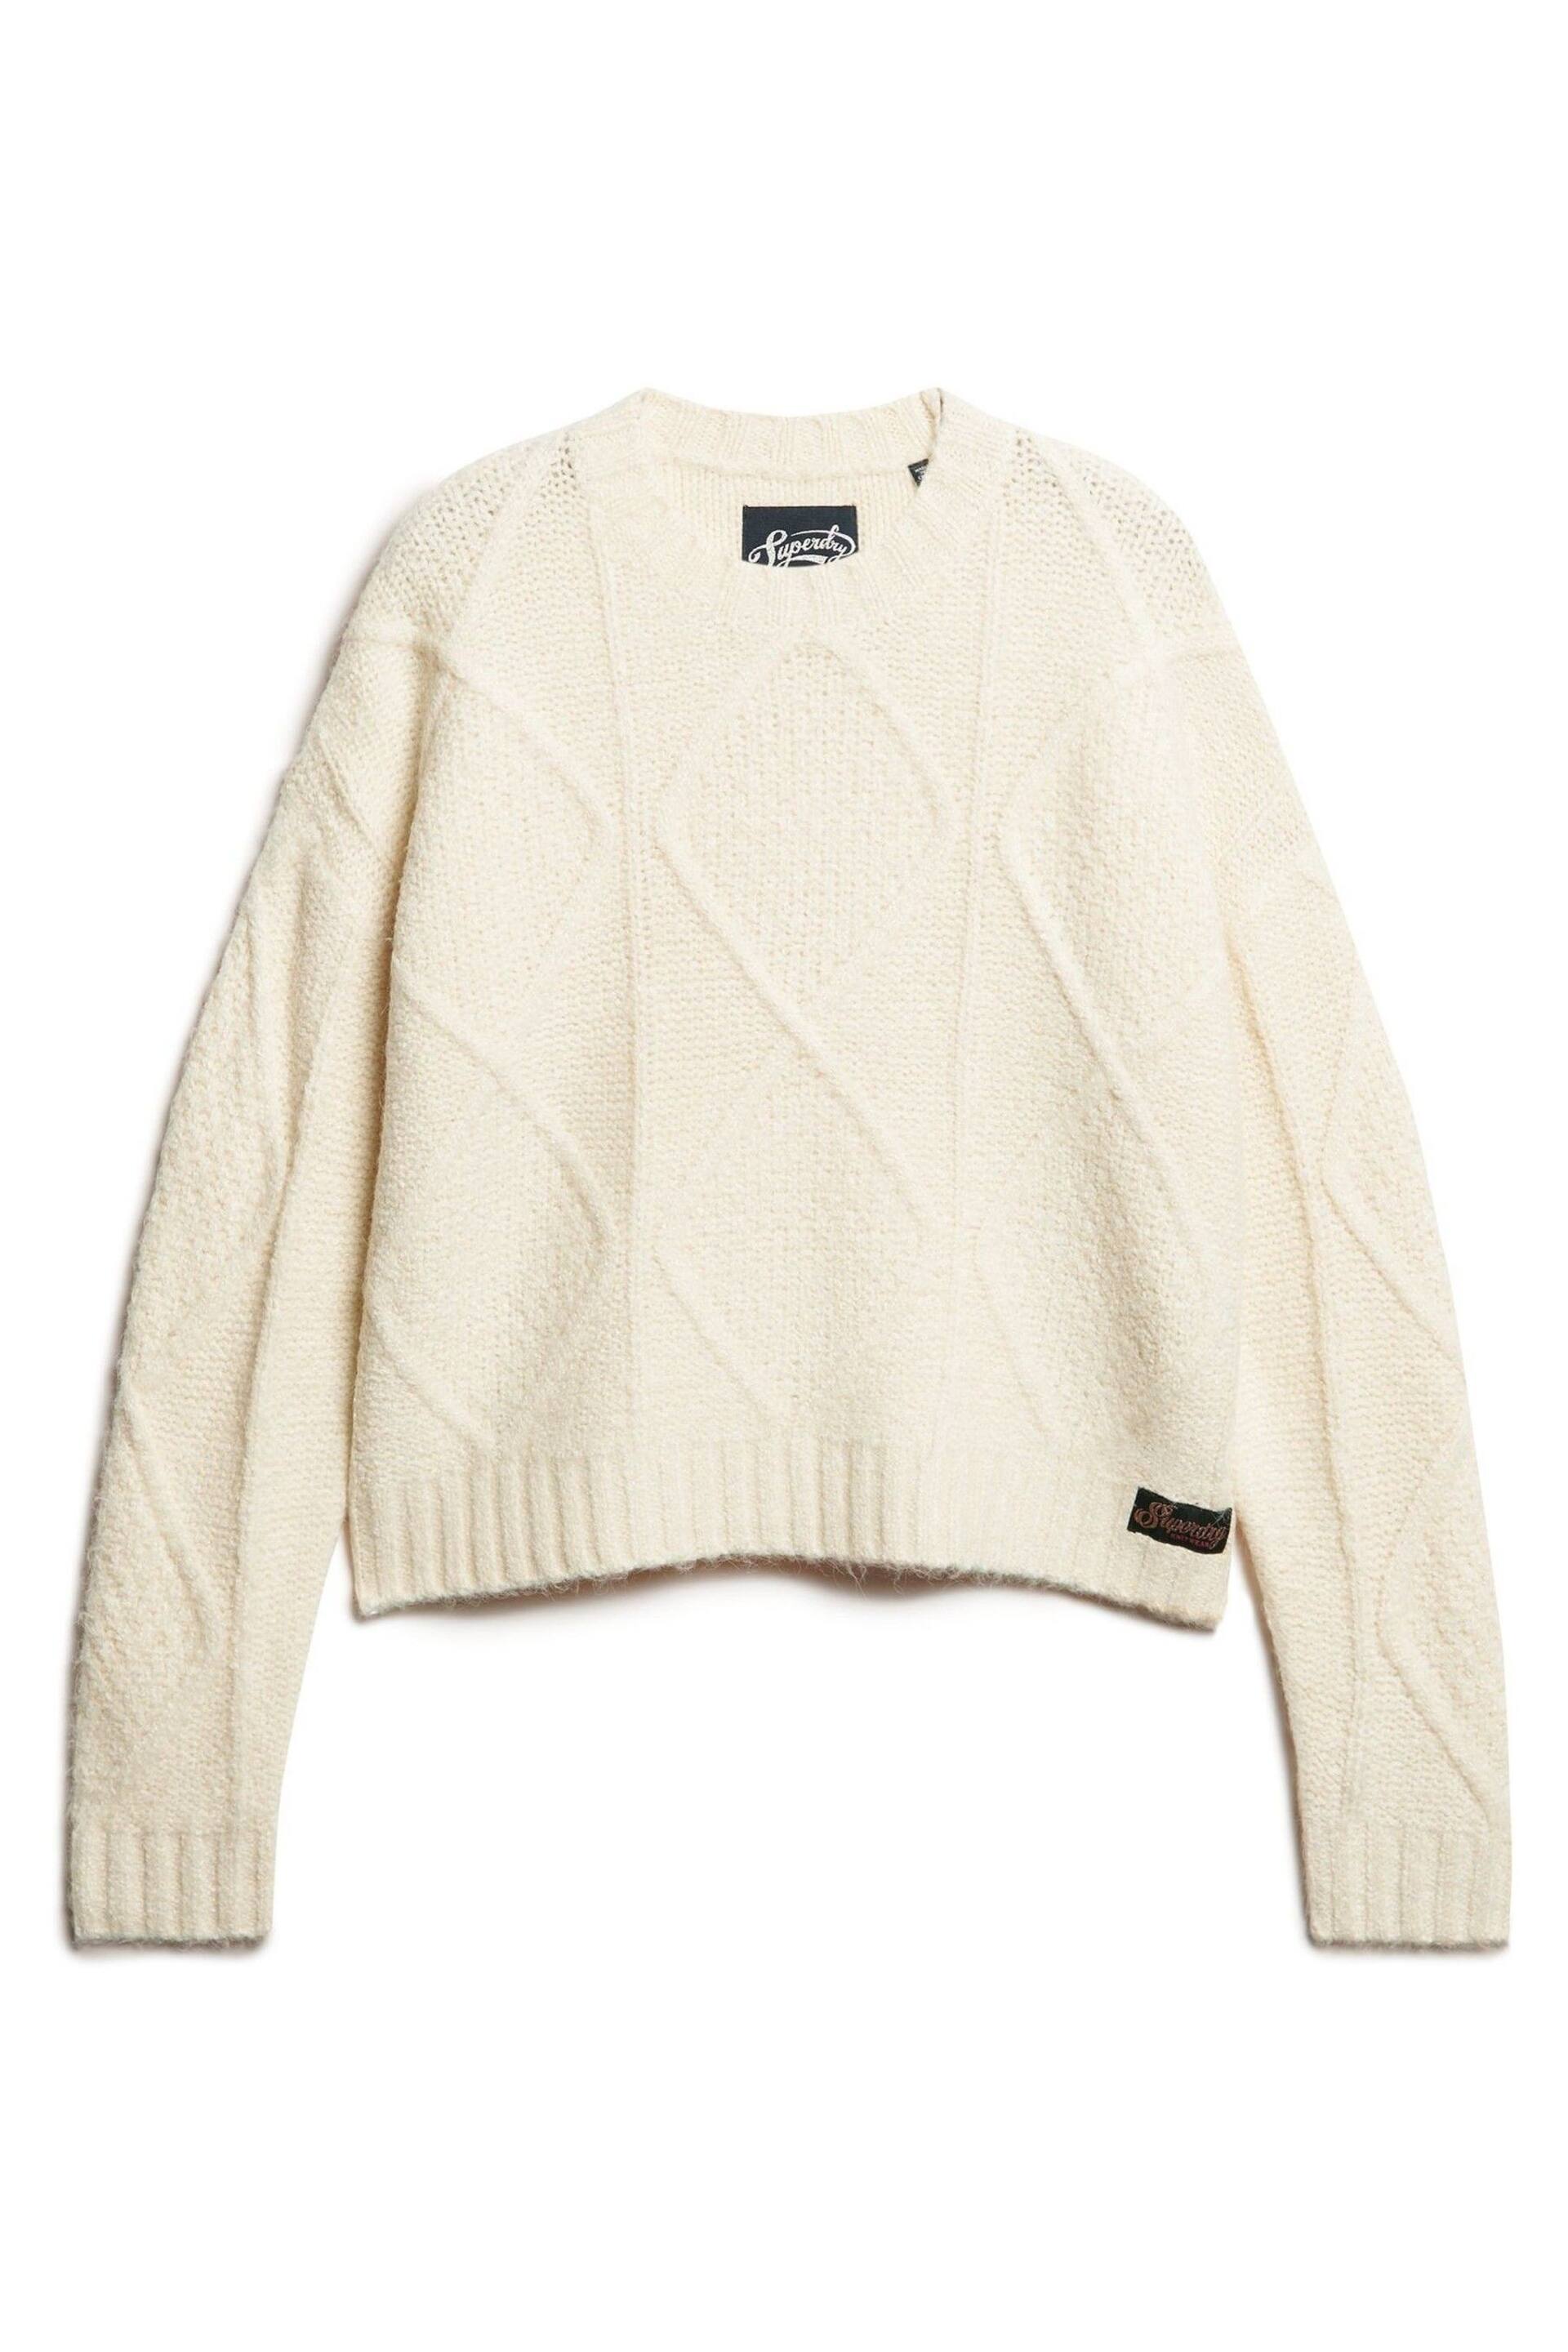 Superdry White Chunky Cable Knitwear Jumper - Image 4 of 6